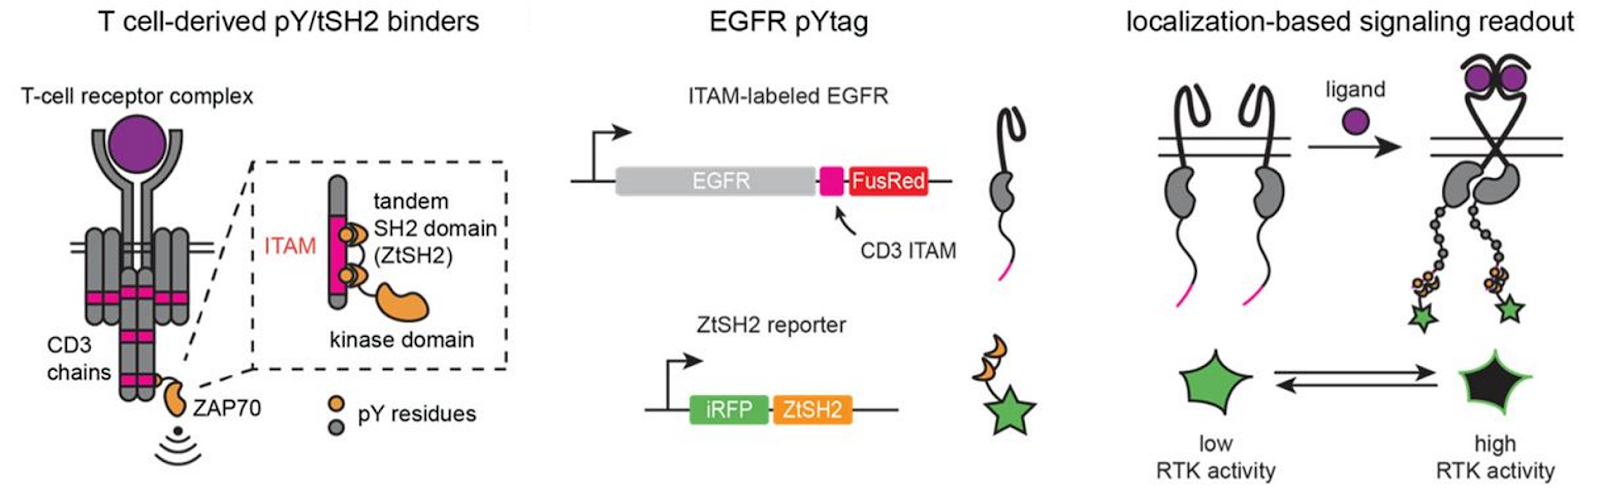 T-cell receptor complex schematic with zoom in of the ITAM (left). Schematic of EGFR gene region with the CD3ITM binding spot appearing in between EGRF and FusRed for labelling. underneath ZISH2 reporter with iRFP and ZISH2 in a gene schematic (middle.) Schematic showing localization-based signal readout through a ligand binding two intermembrane proteins causing an increase in RTK activity (right.) 